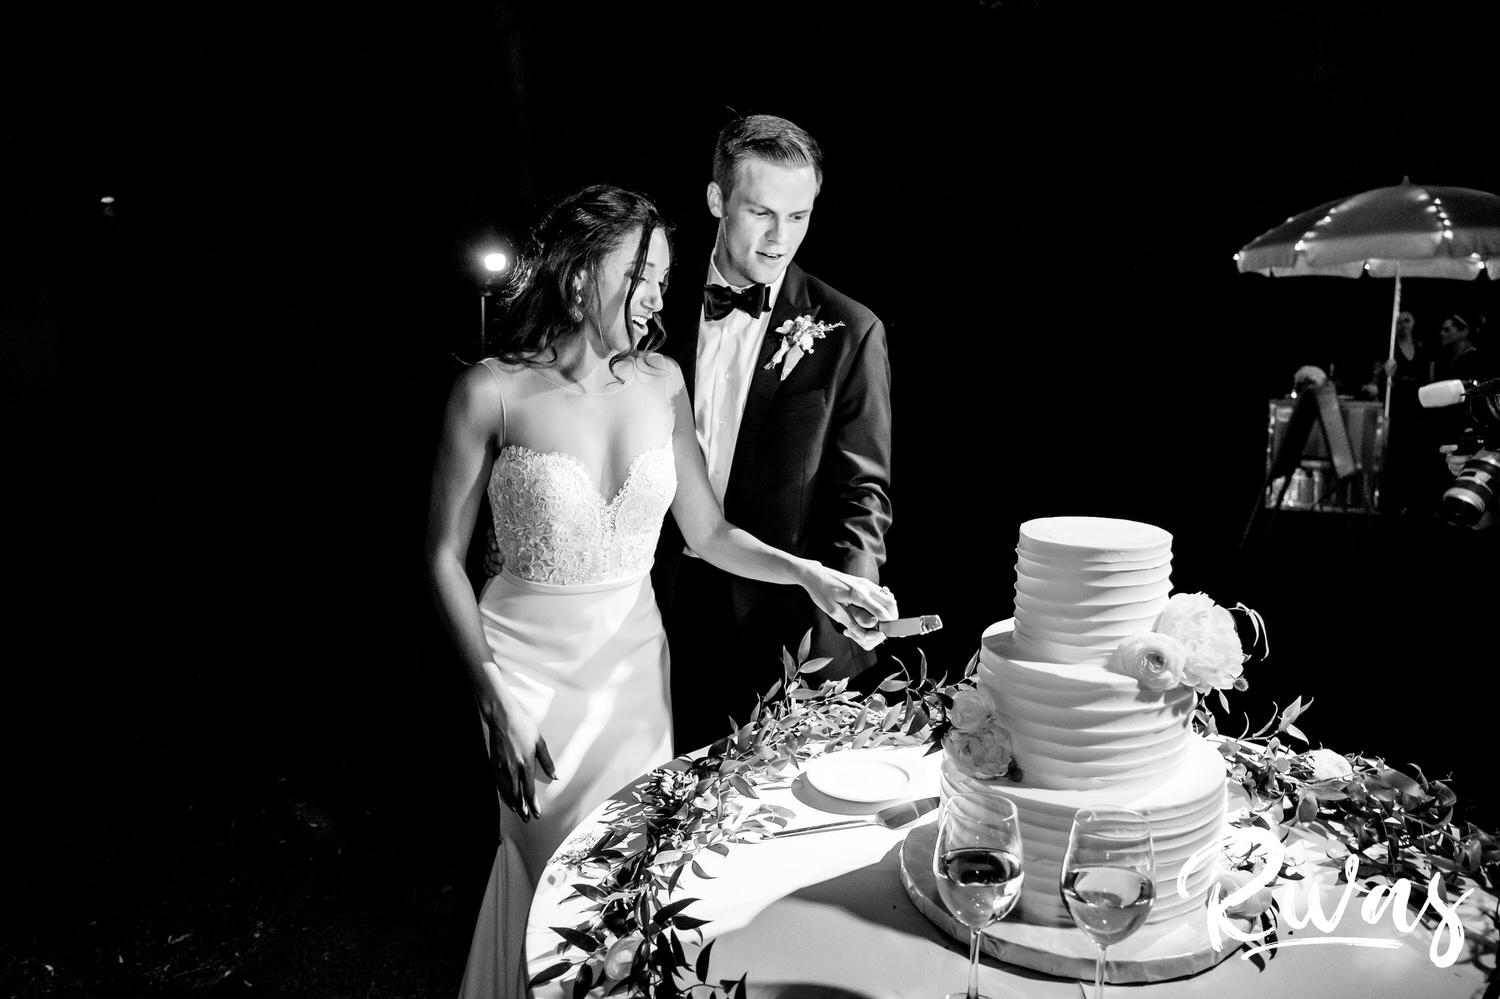 Saddlerock Ranch Summer Wedding | Destination Wedding Photographers | Rivas | A black and white candid image of a bride and groom cutting their three tier, white buttercream wedding cake during their wedding reception at Saddlerock Ranch in Malibu. 